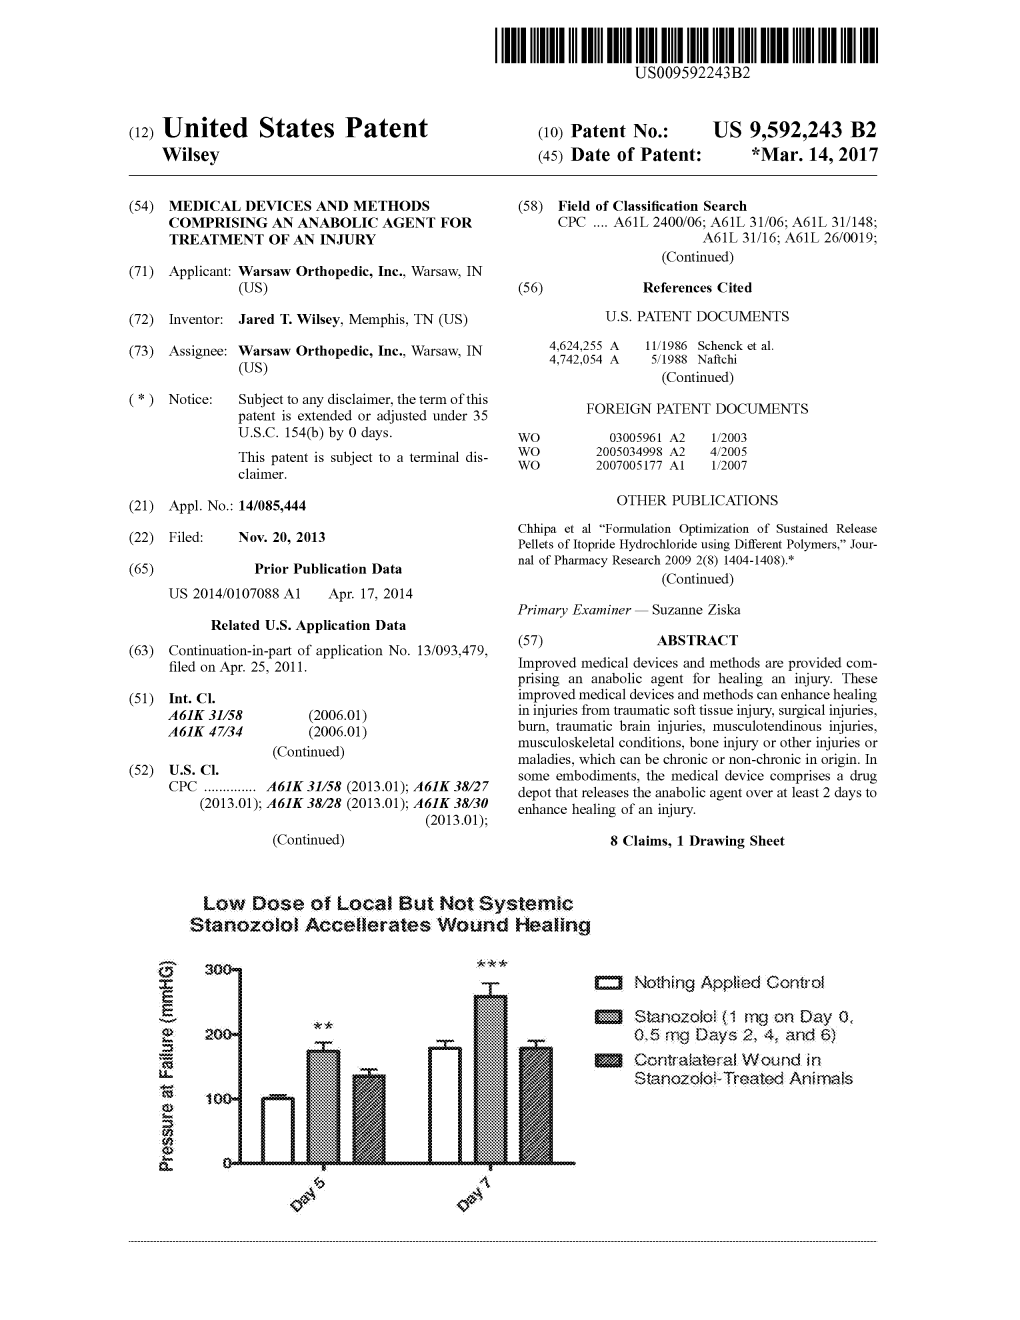 (12) United States Patent (10) Patent No.: US 9,592.243 B2 Wilsey (45) Date of Patent: *Mar